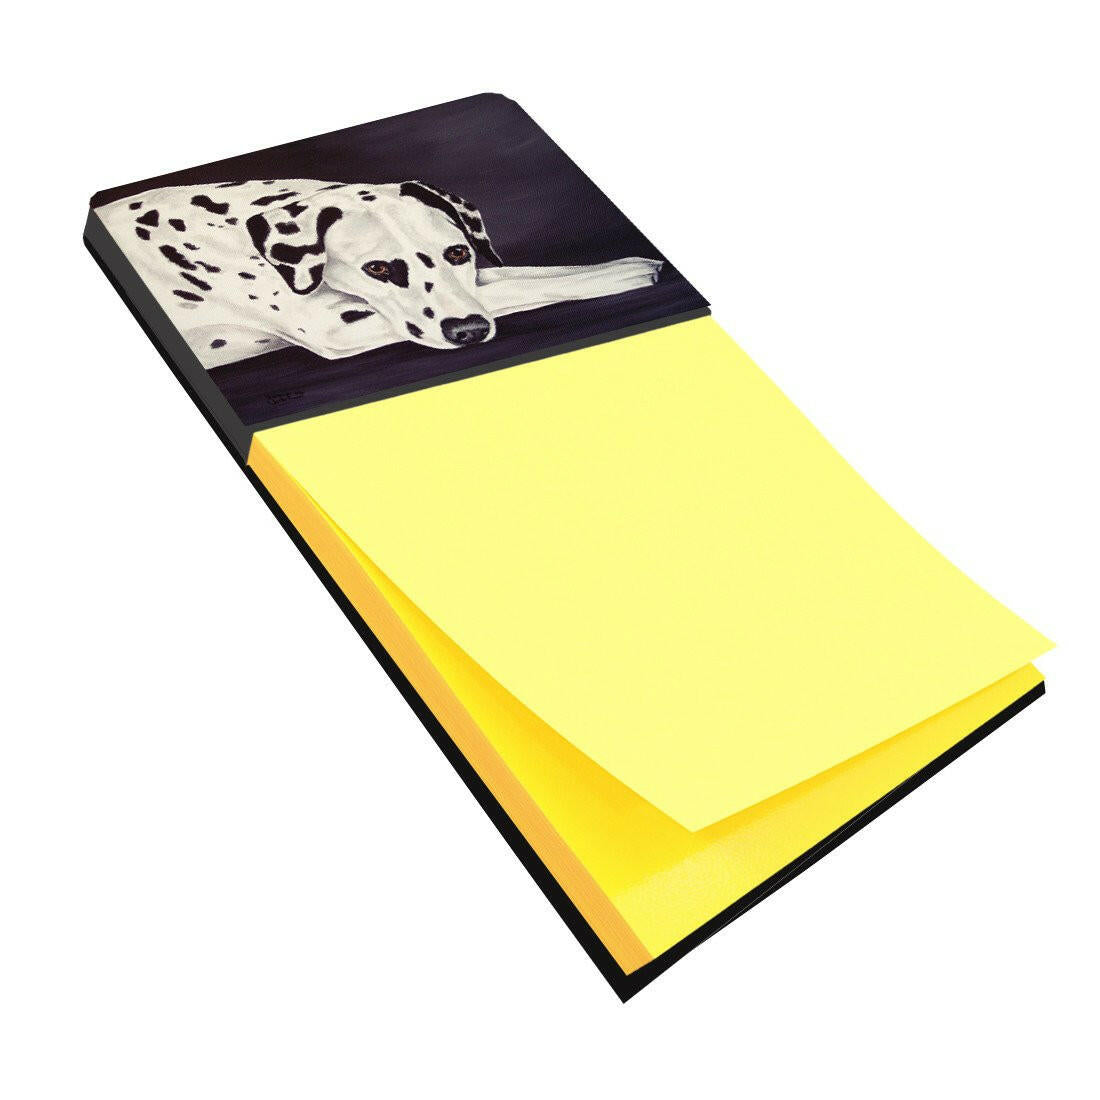 Dal Dalmatian Sticky Note Holder AMB1193SN by Caroline's Treasures